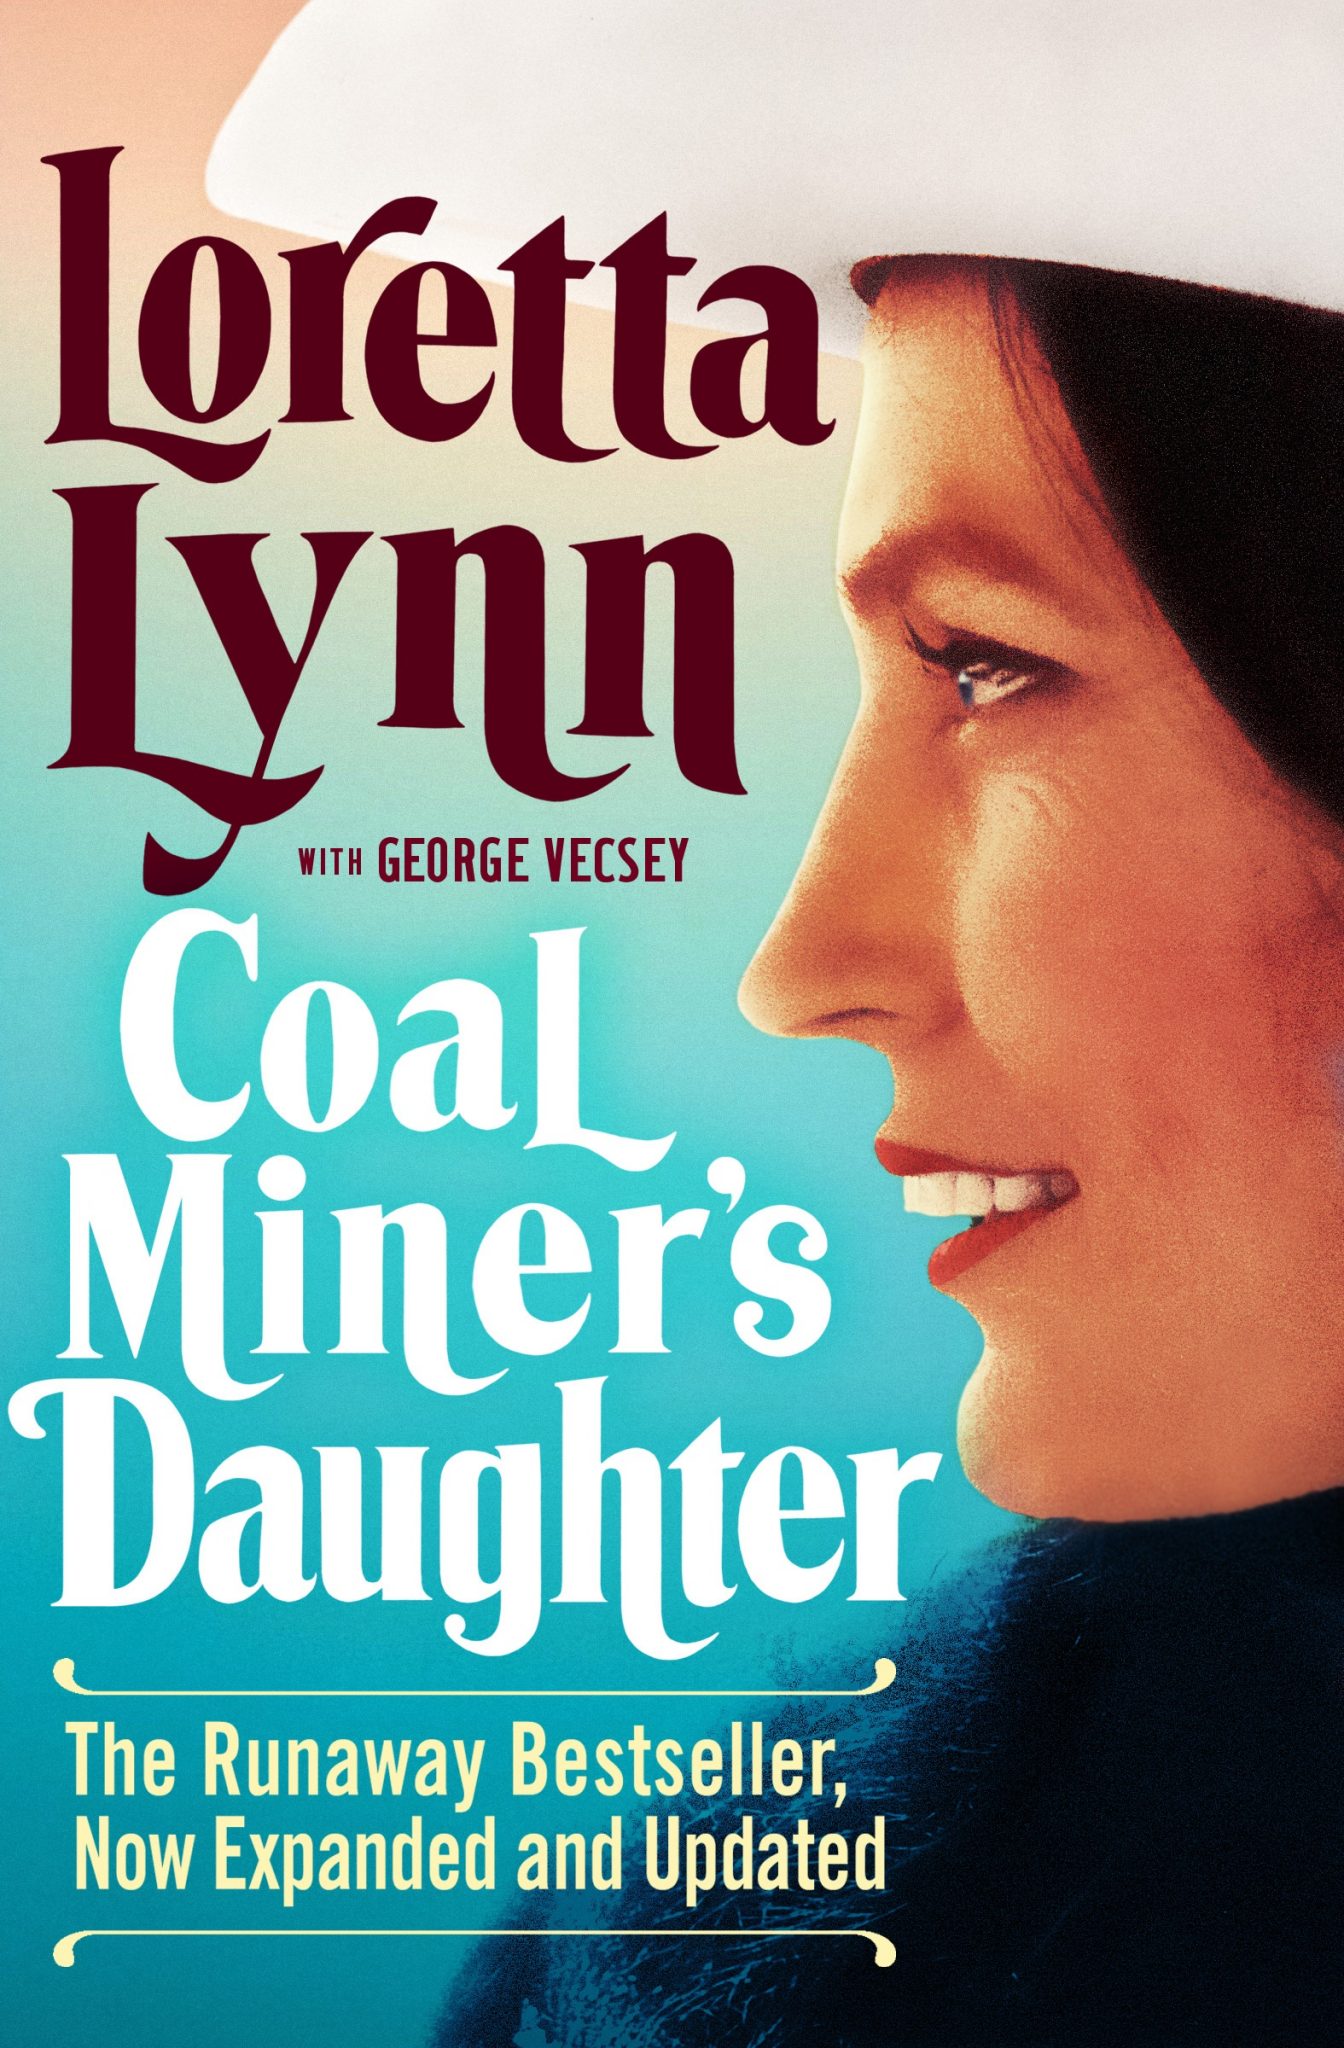 Enter For A Chance to WIN A Paperback Copy of Loretta Lynn's 'Coal